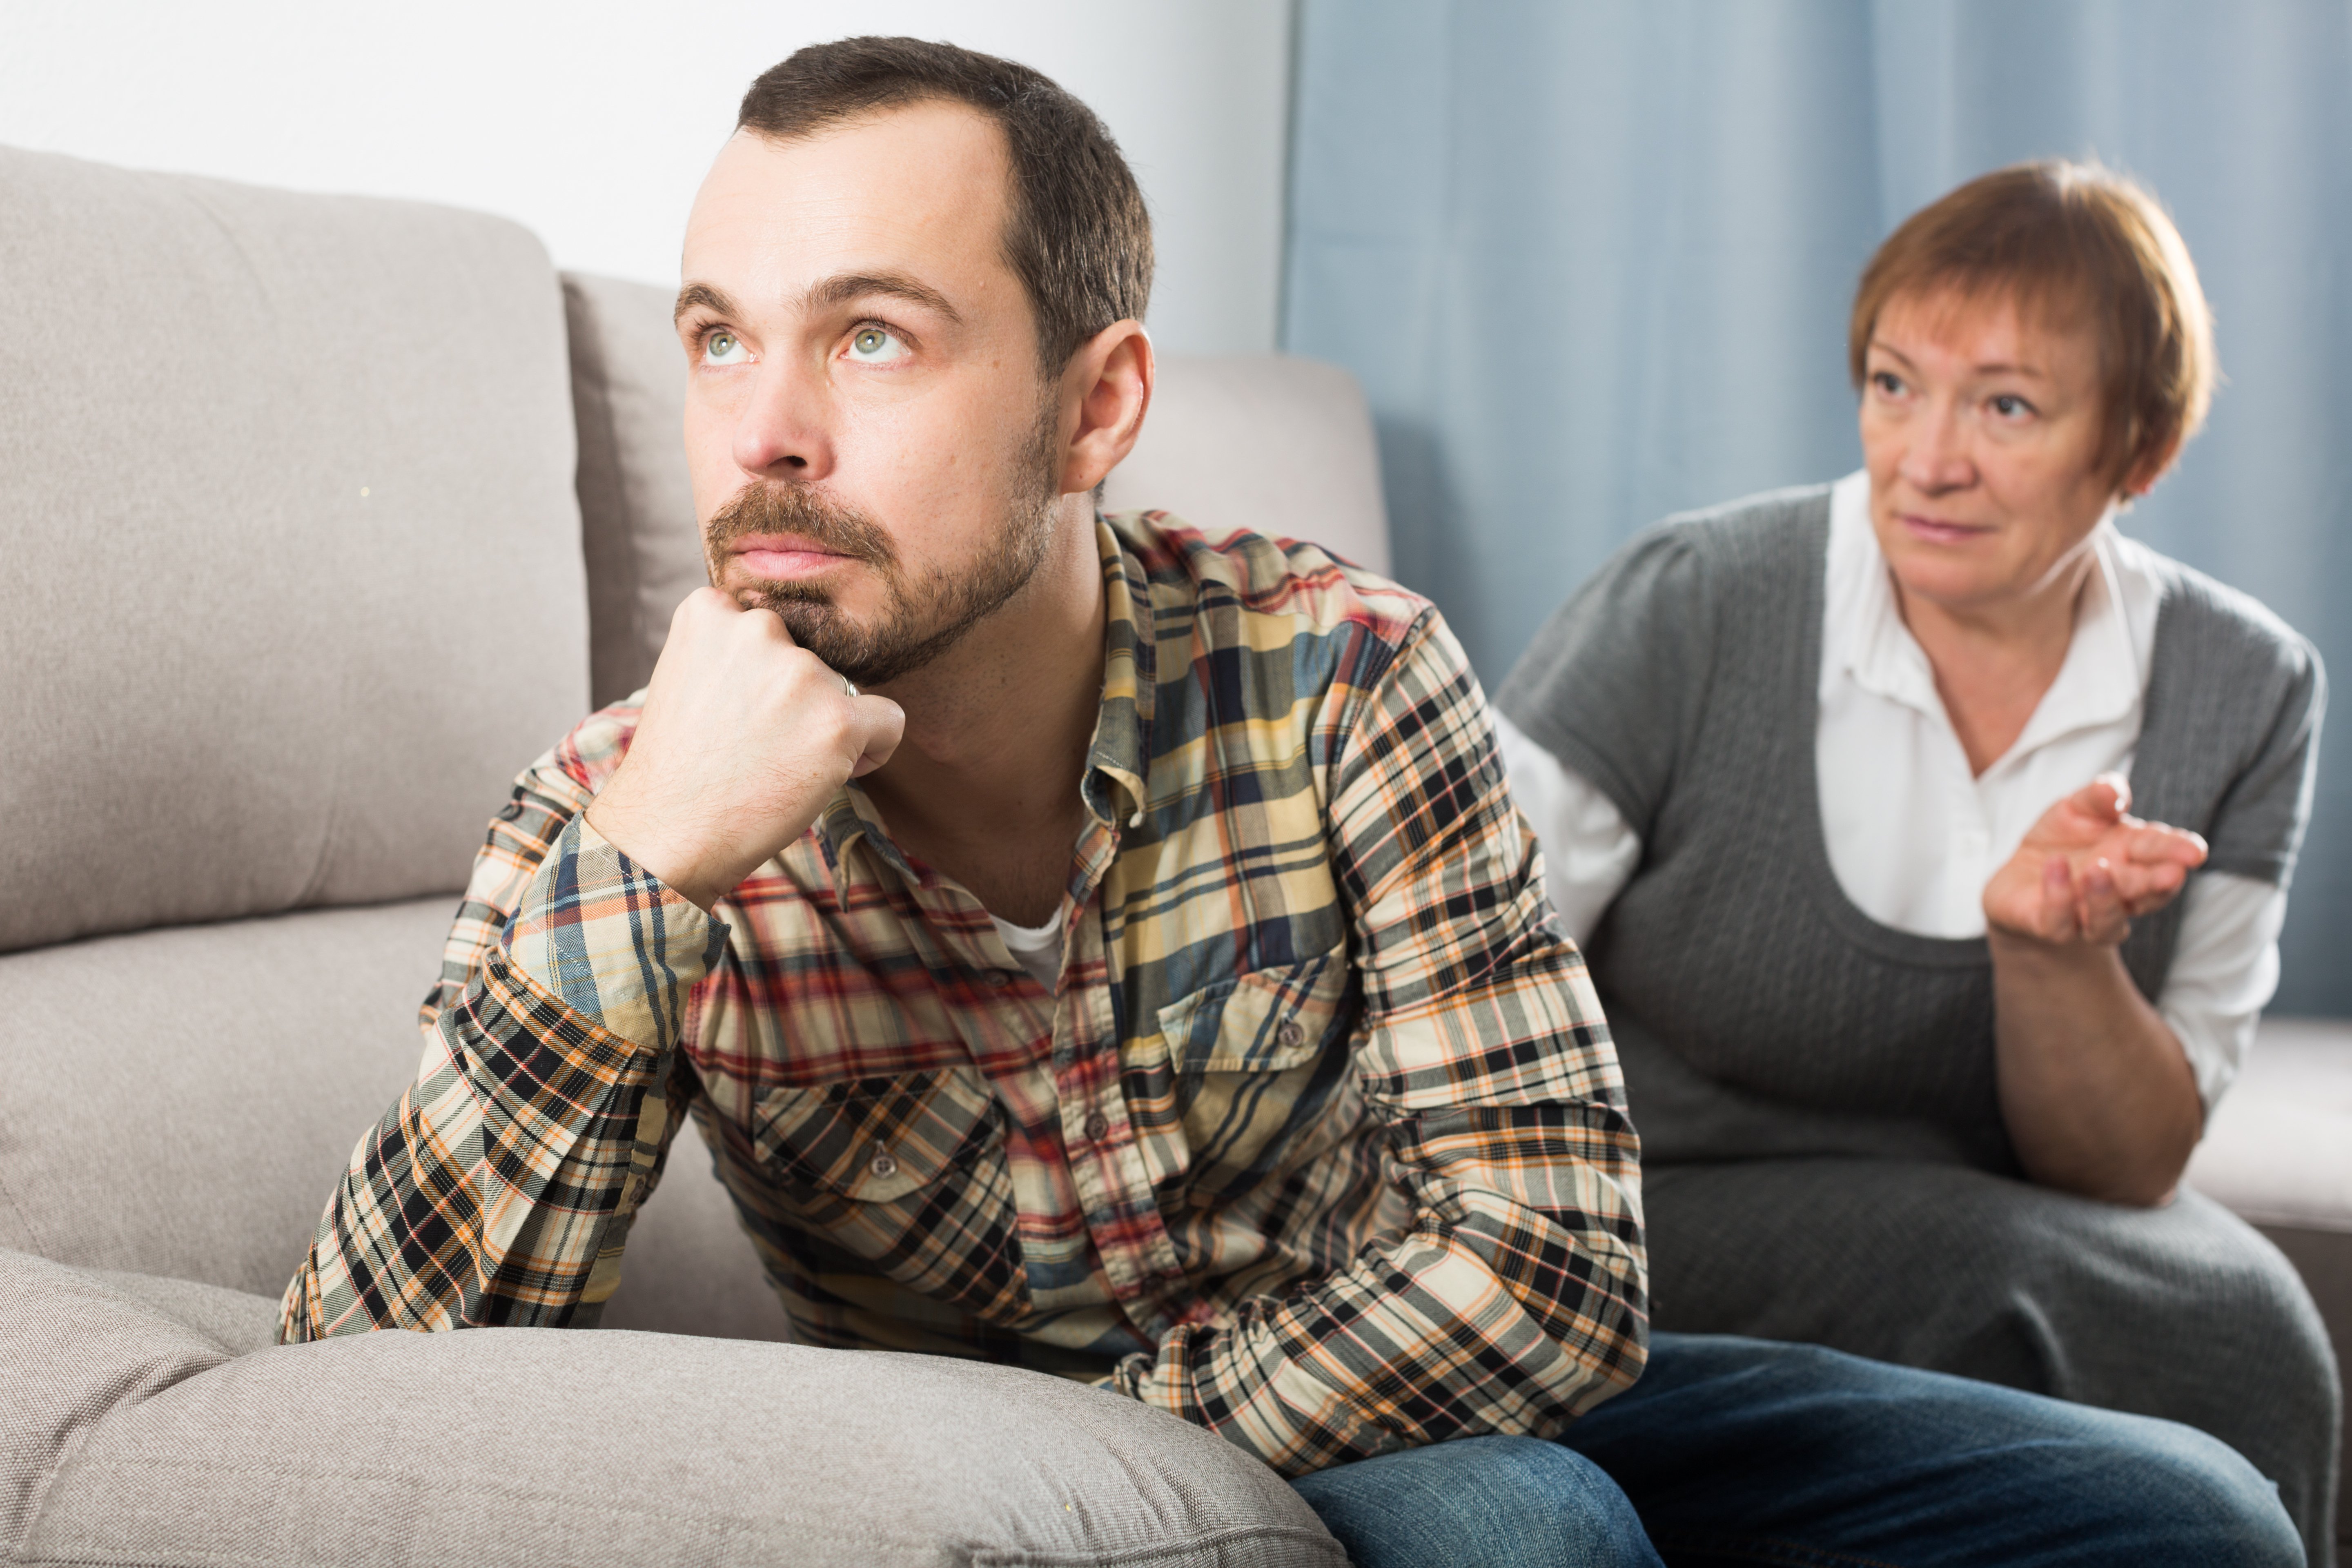 Older woman and her son arguing | Source: Shutterstock